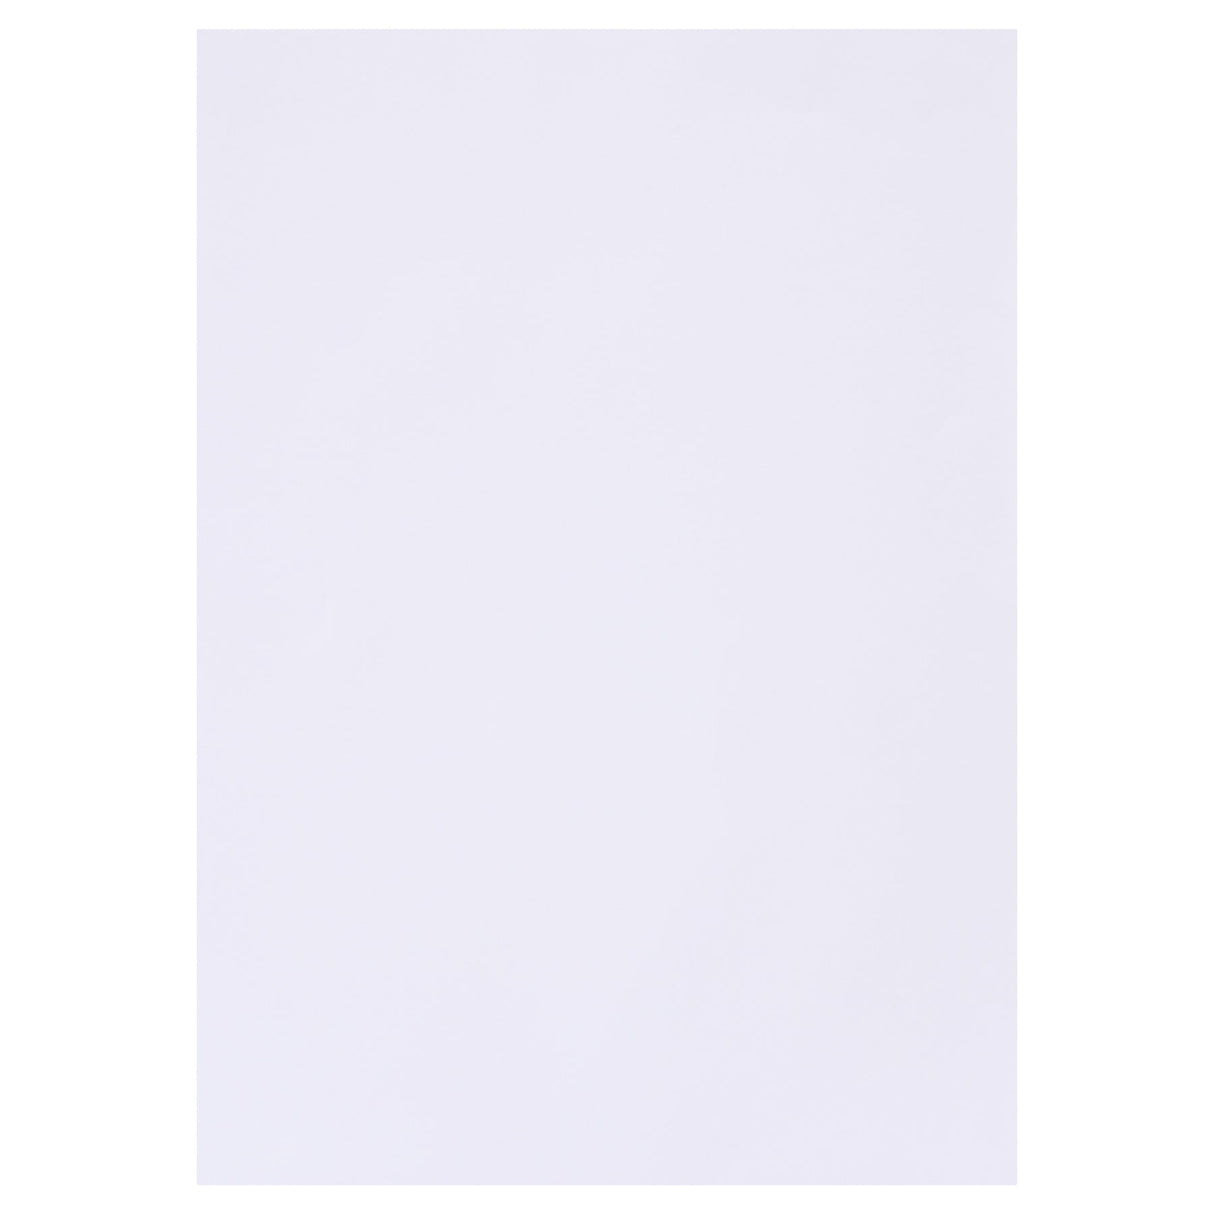 Premier Activity A2 Card - 160gsm - White - 25 Sheets | Stationery Shop UK